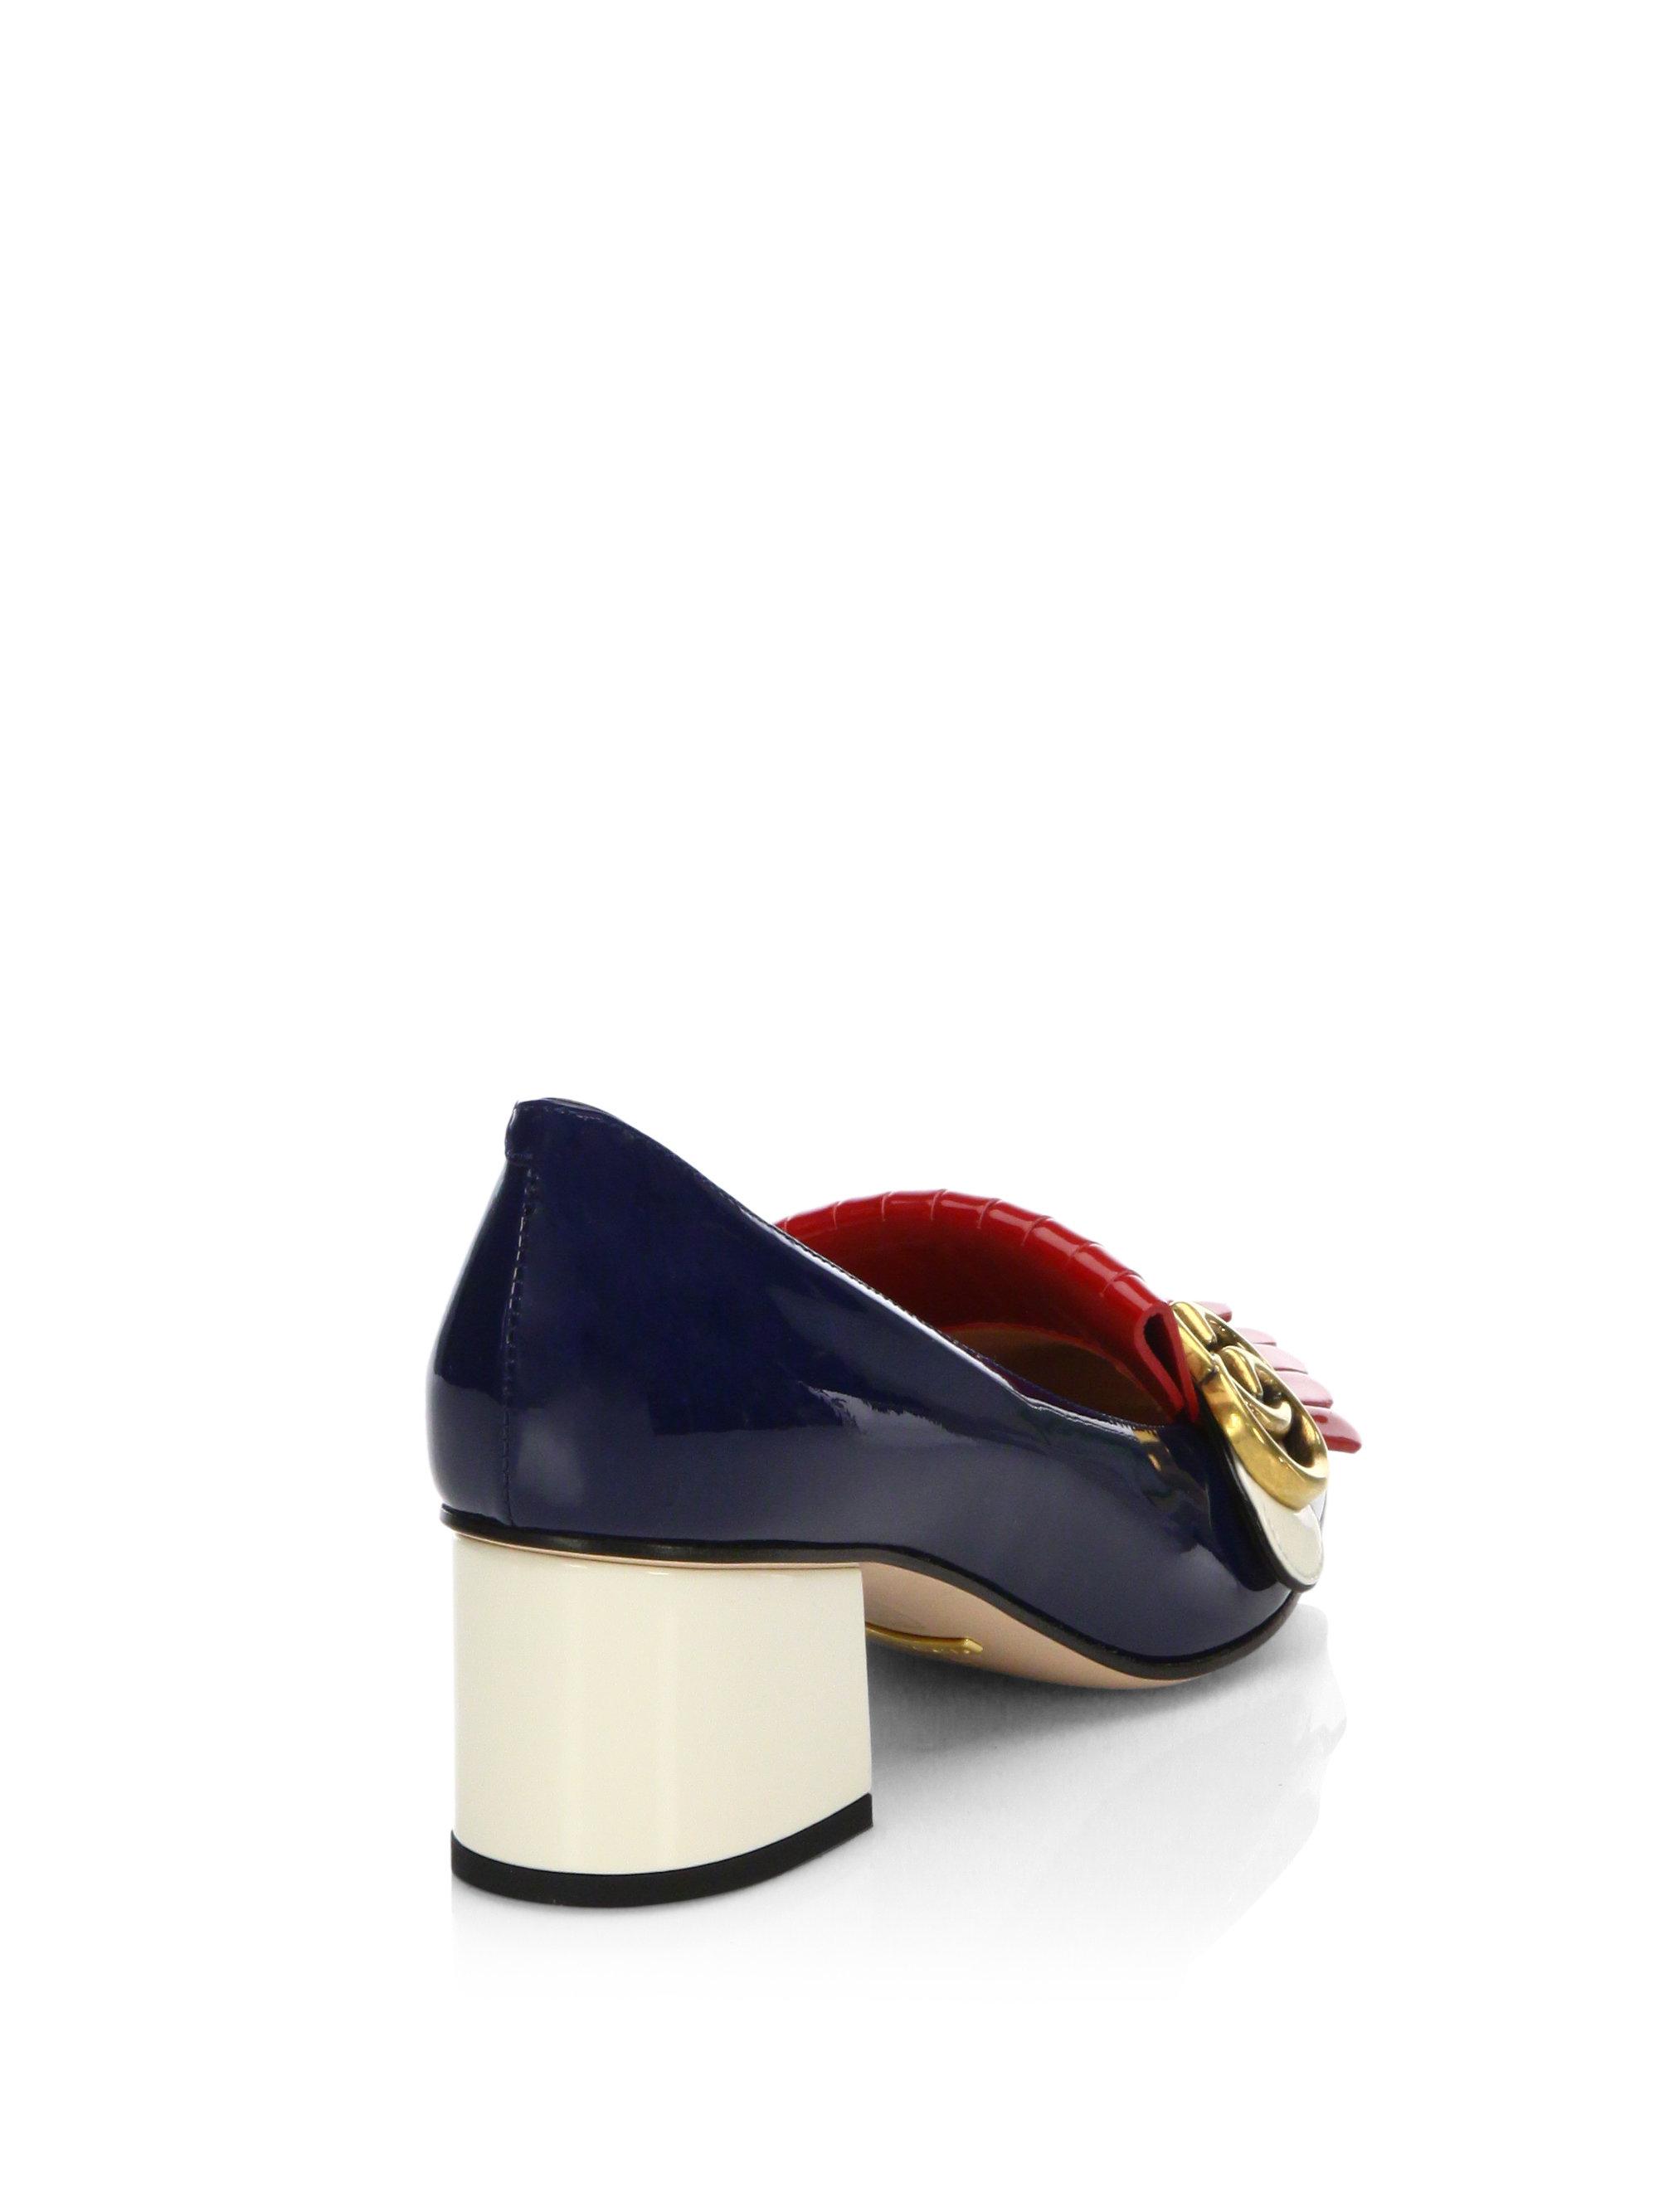 Gucci Marmont Gg Studded Tri-tone Patent Leather Loafer Pumps in 